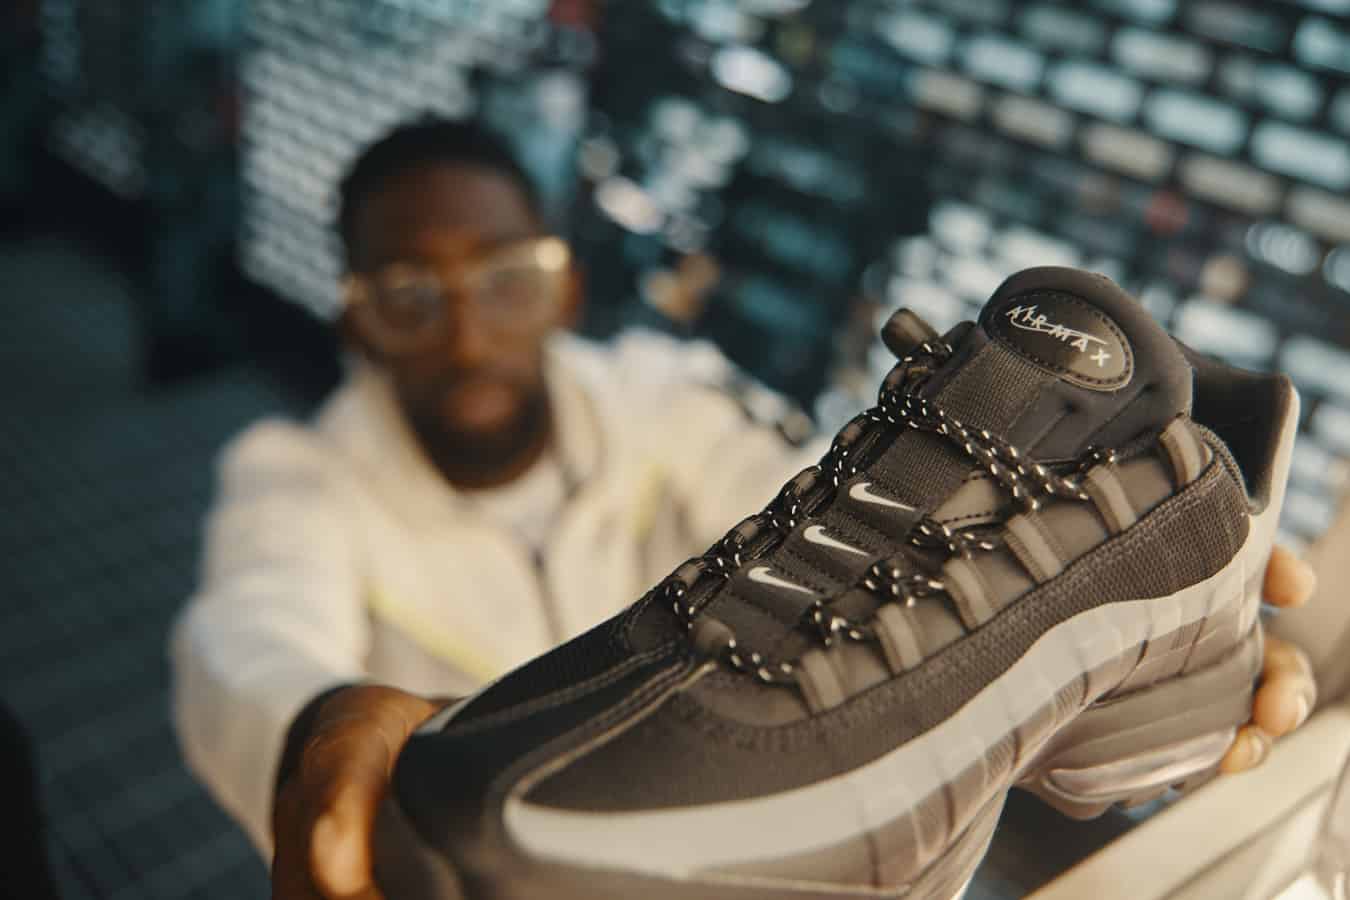 'King of Trainers' JD Sports is named an Elite retailer for the first time. Image courtesy of JD Group